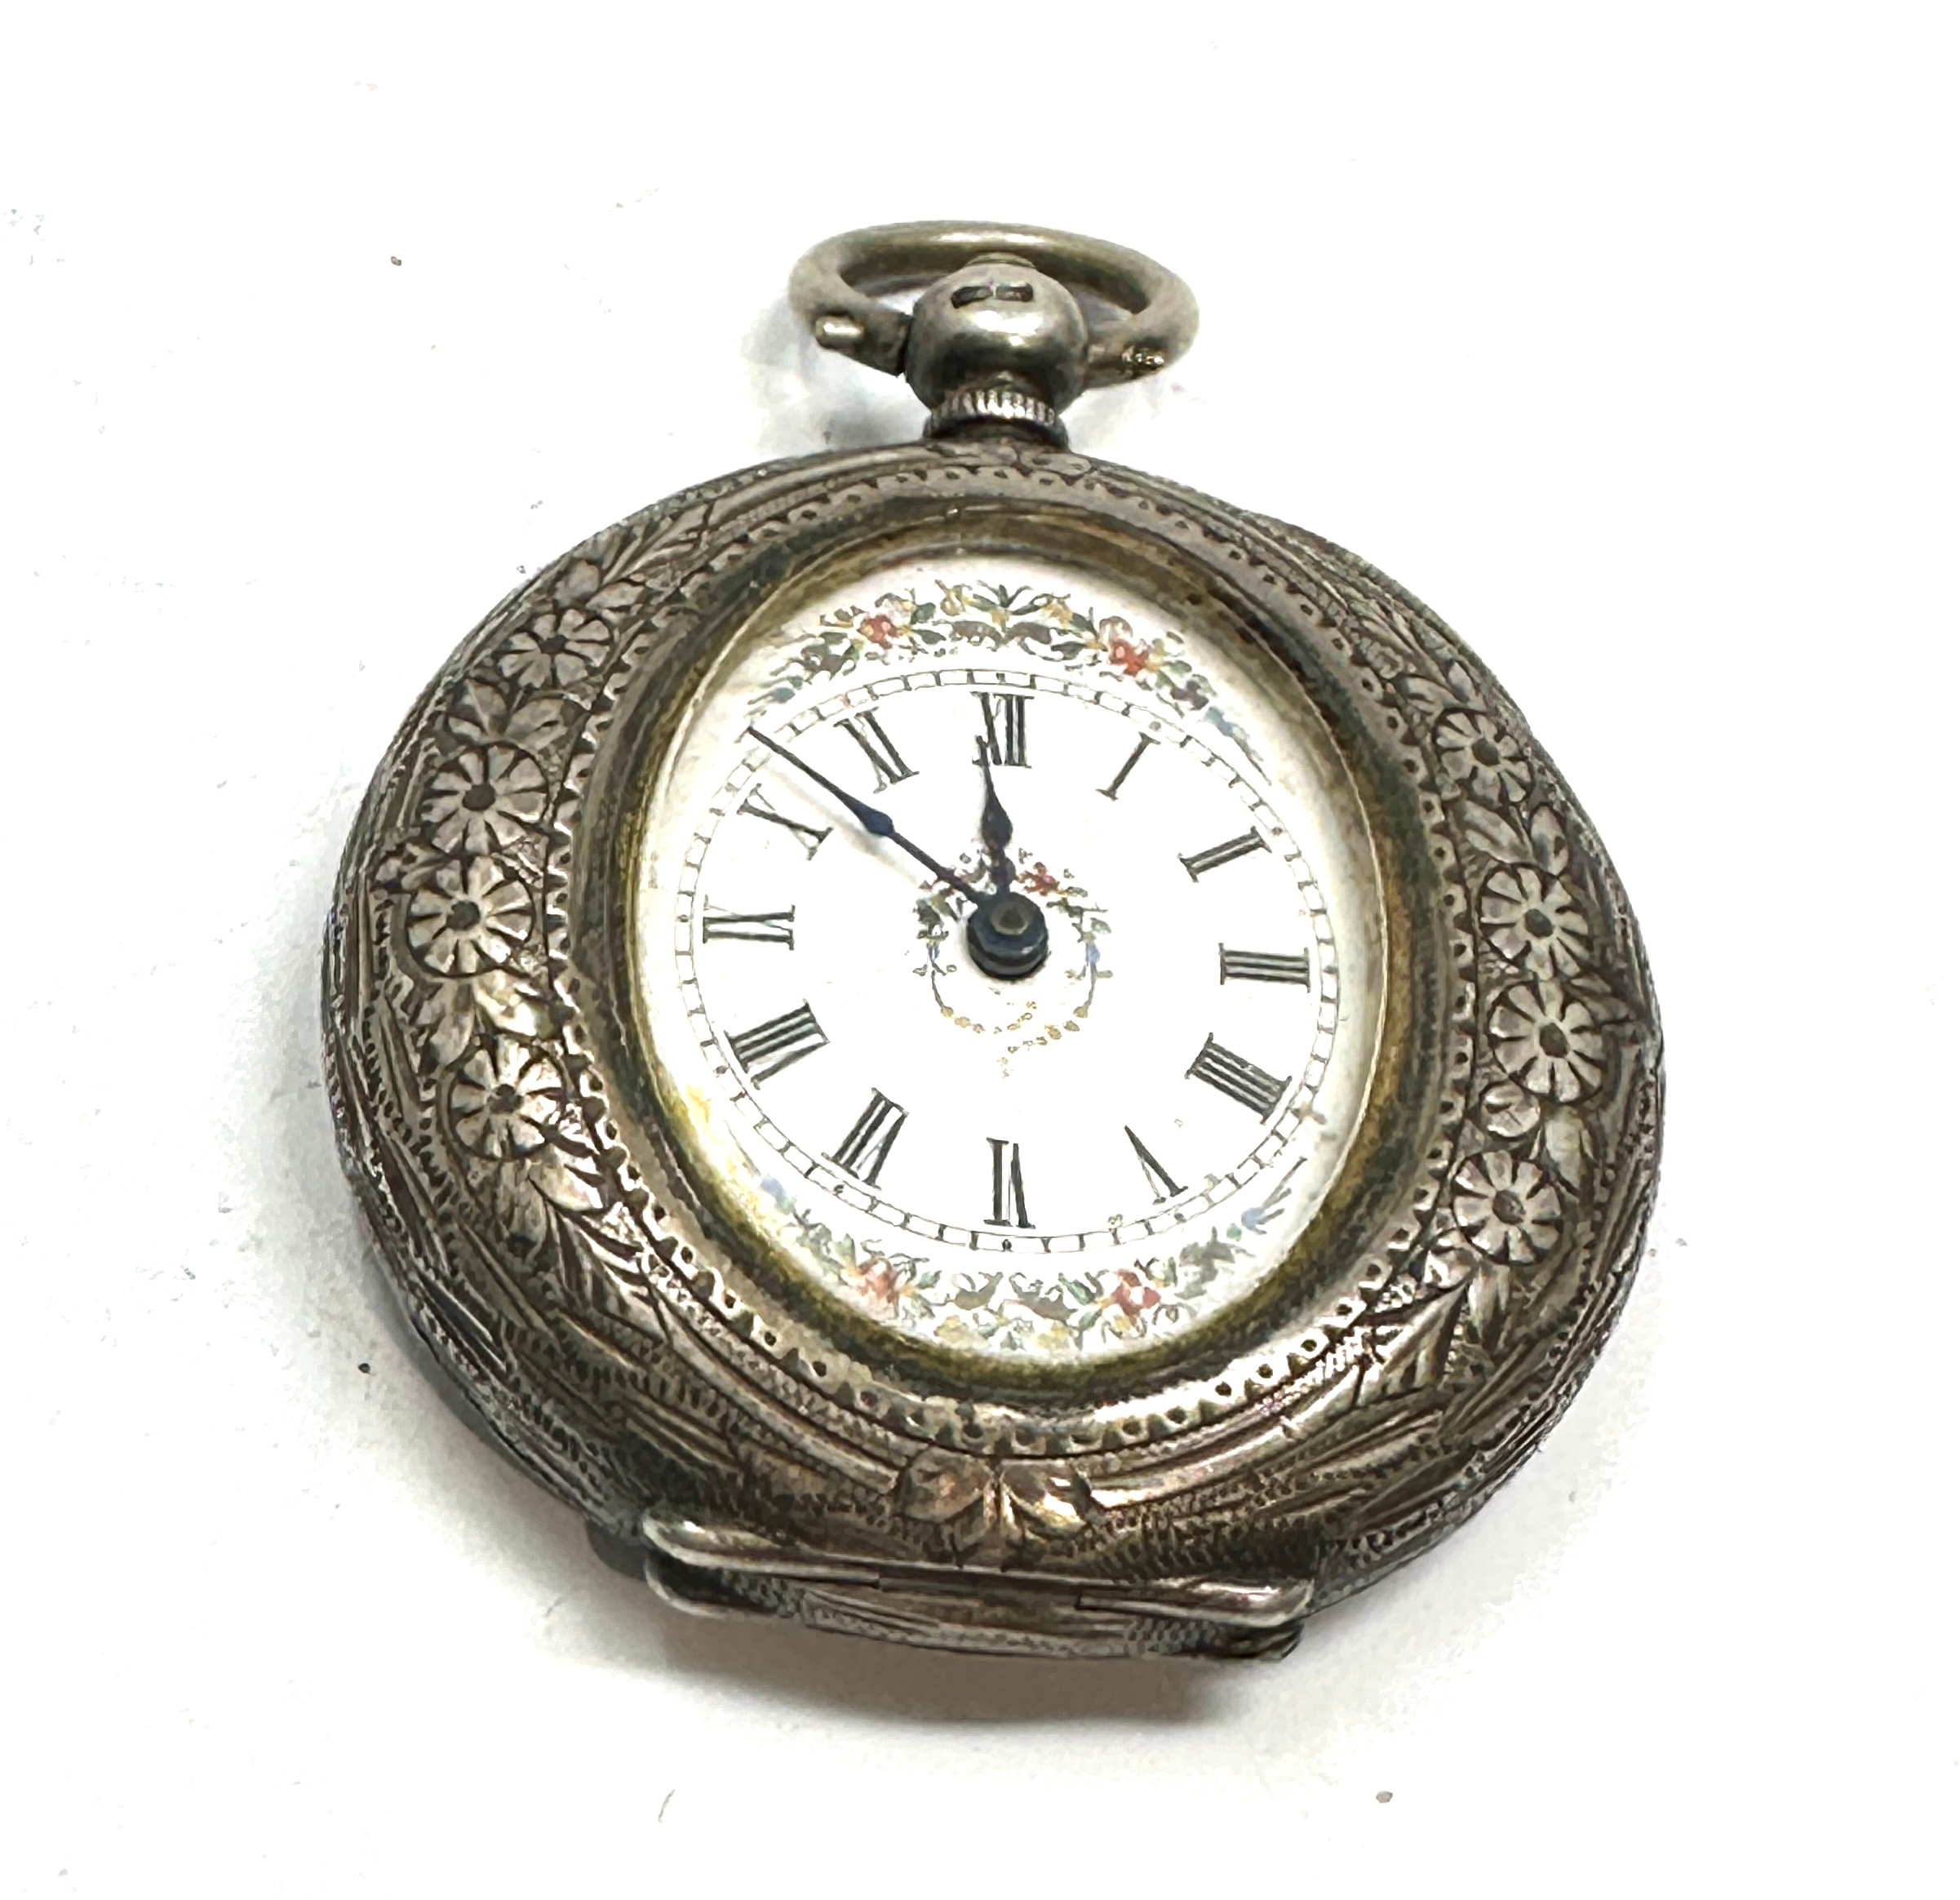 Antique silver fob watch the watch is not ticking